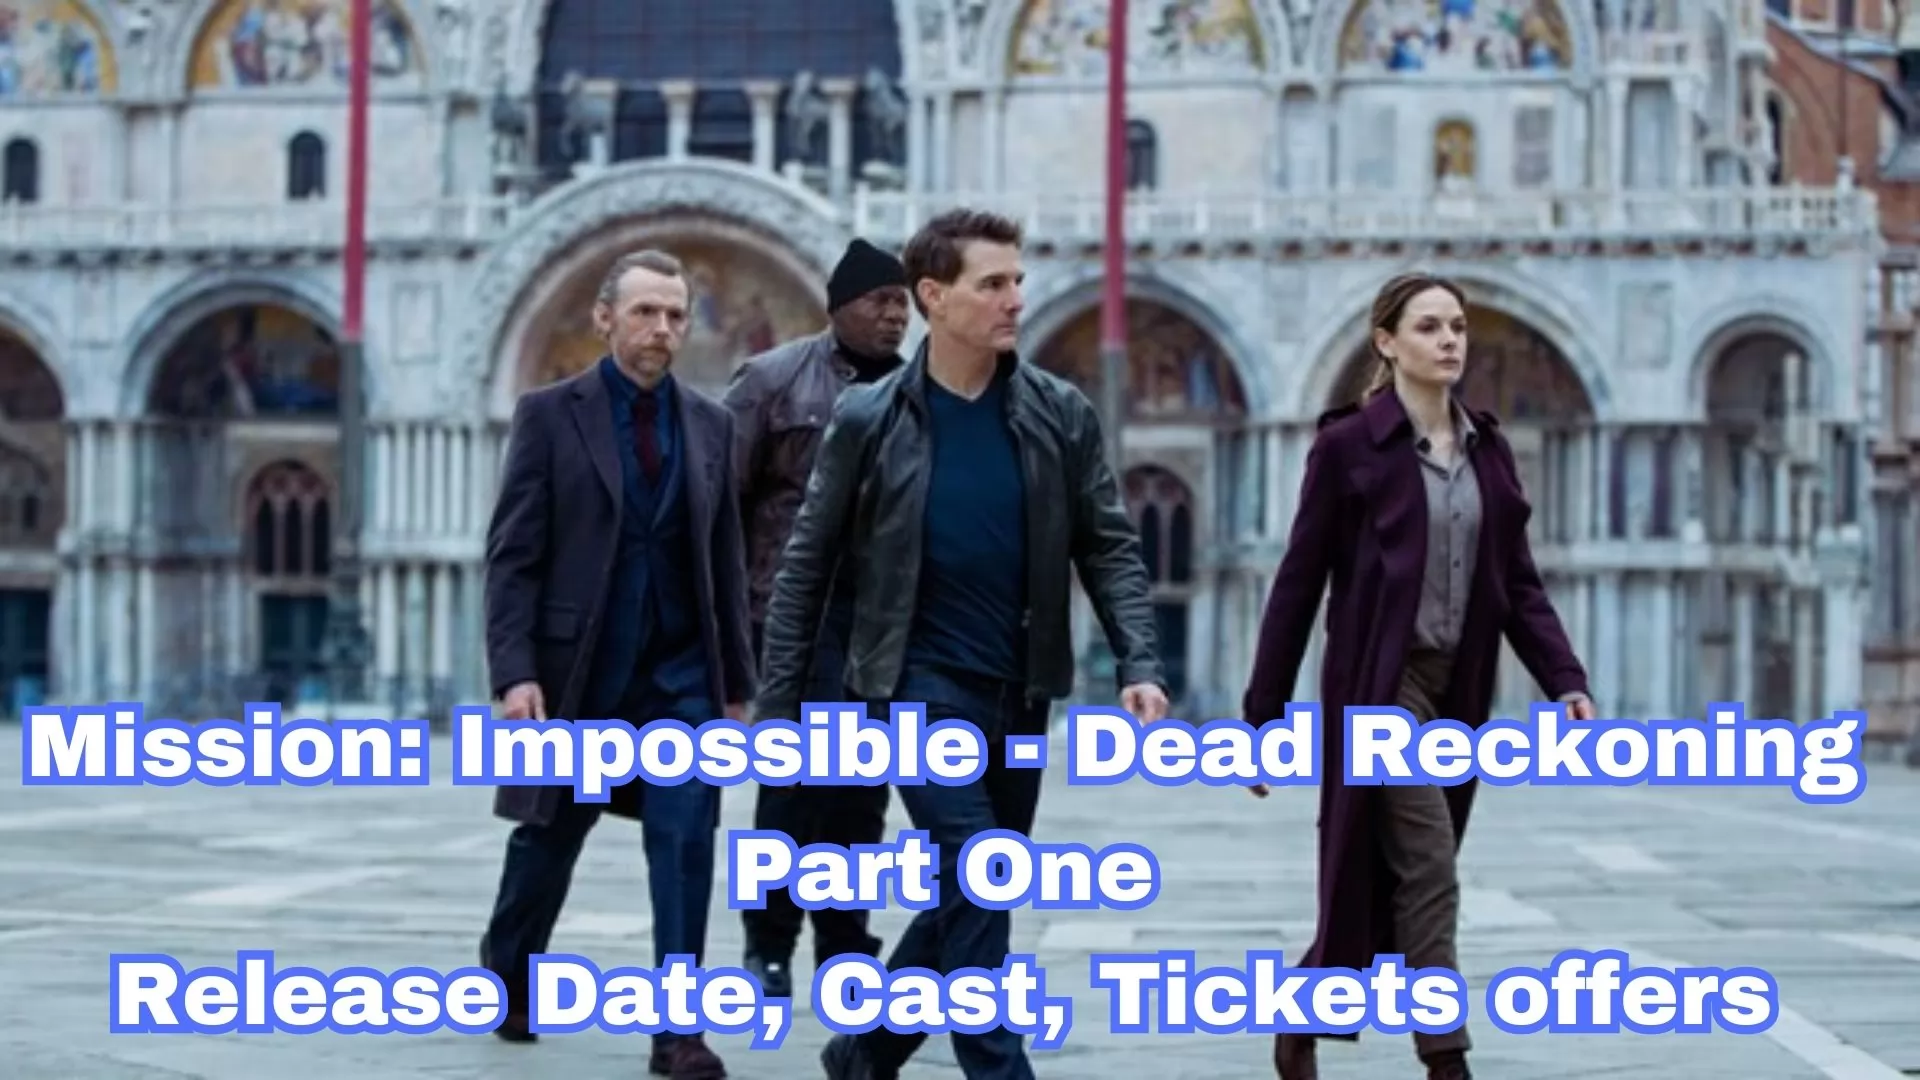 Mission: Impossible - Dead Reckoning Part One Release Date, Cast, Tickets offers